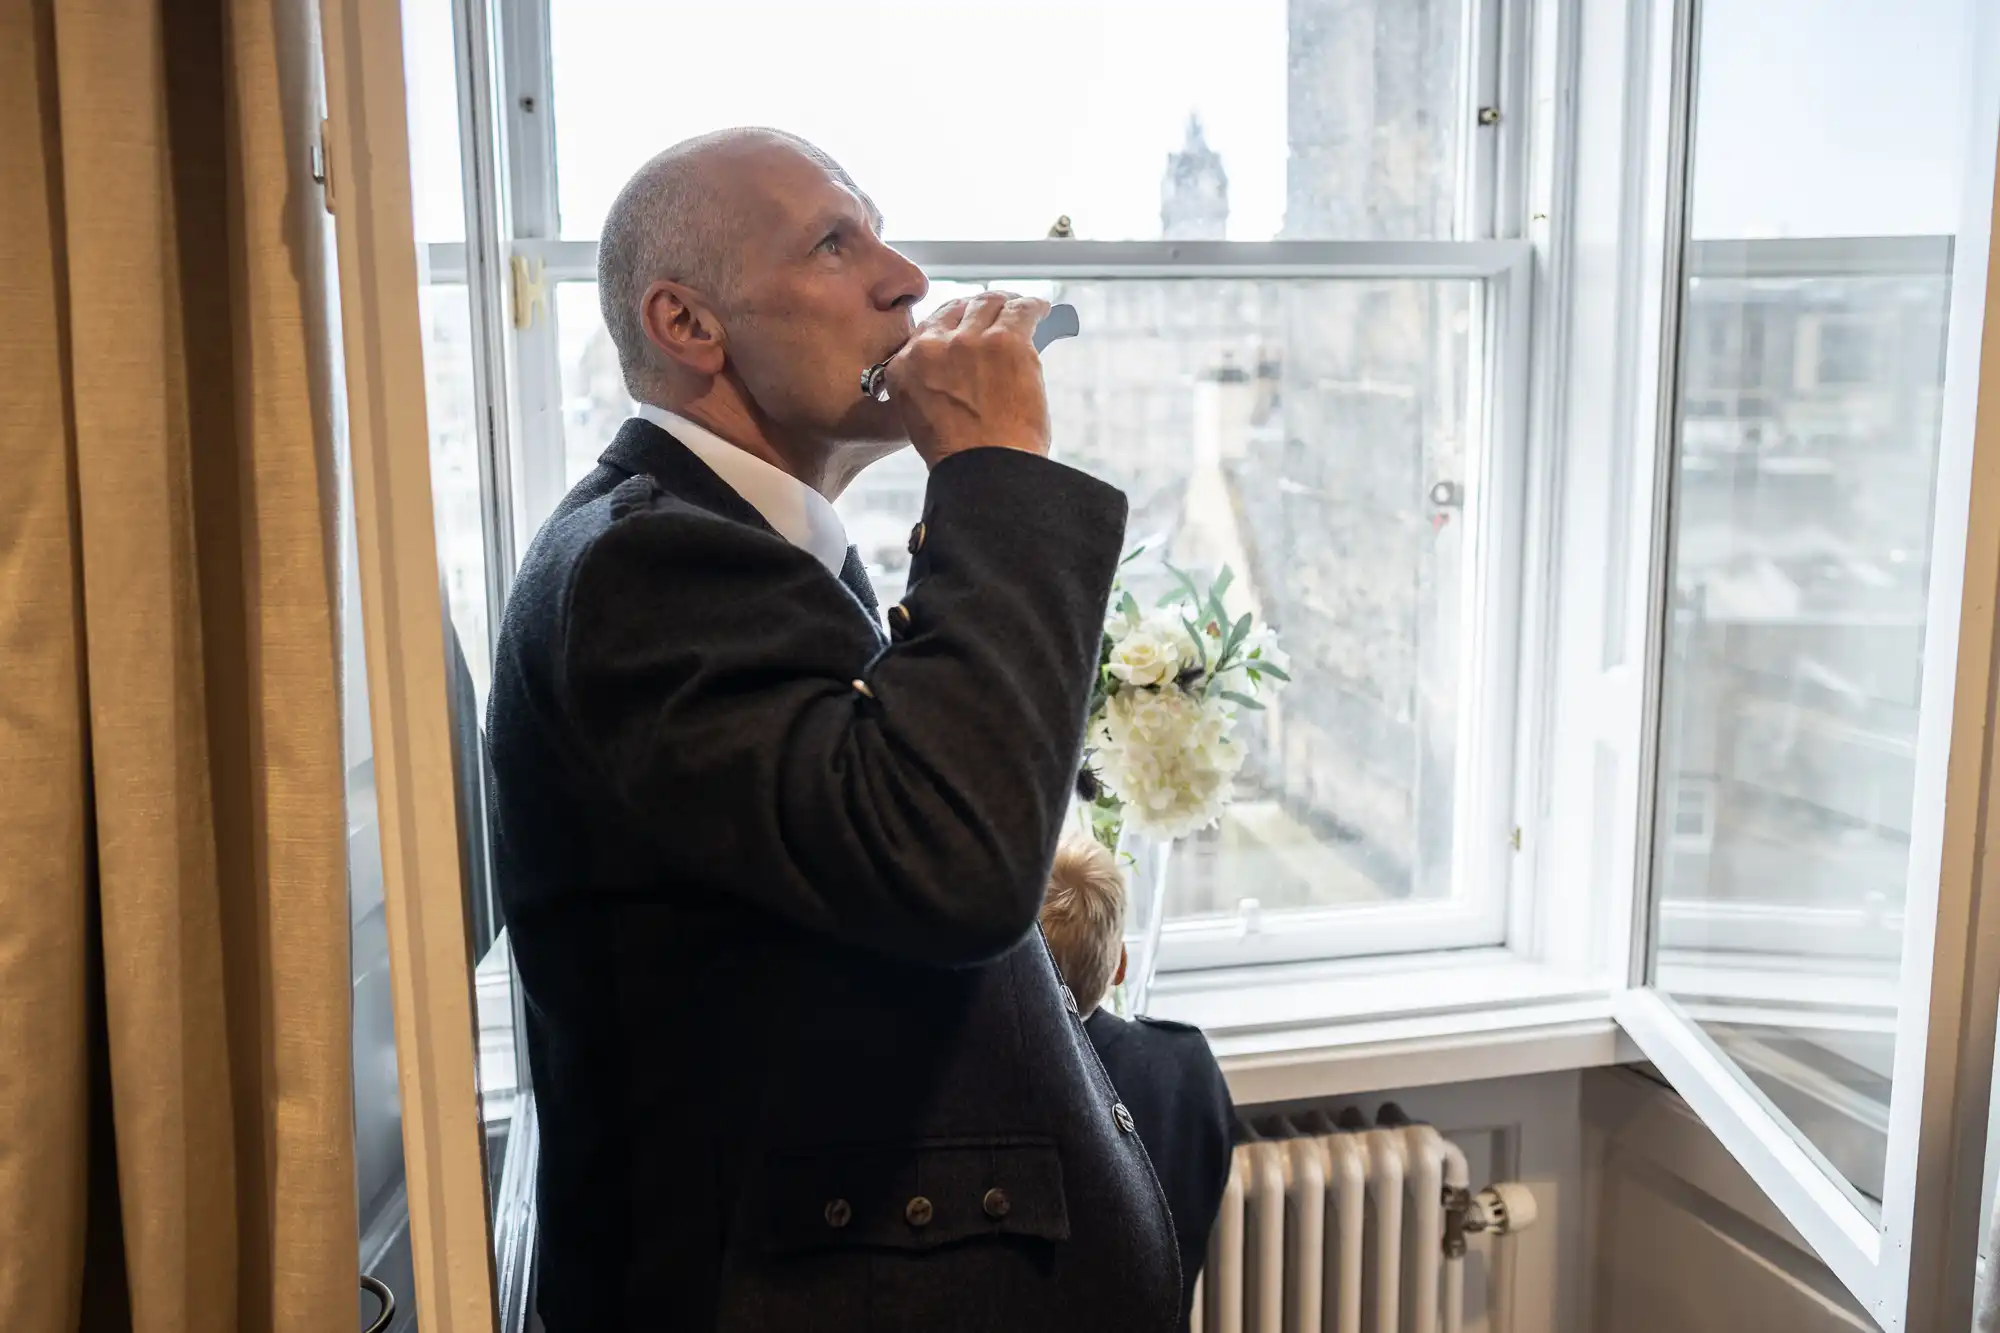 A man in a suit drinking from a flask while looking out a window with a cityscape view. A vase with flowers and a radiator are visible in the room.